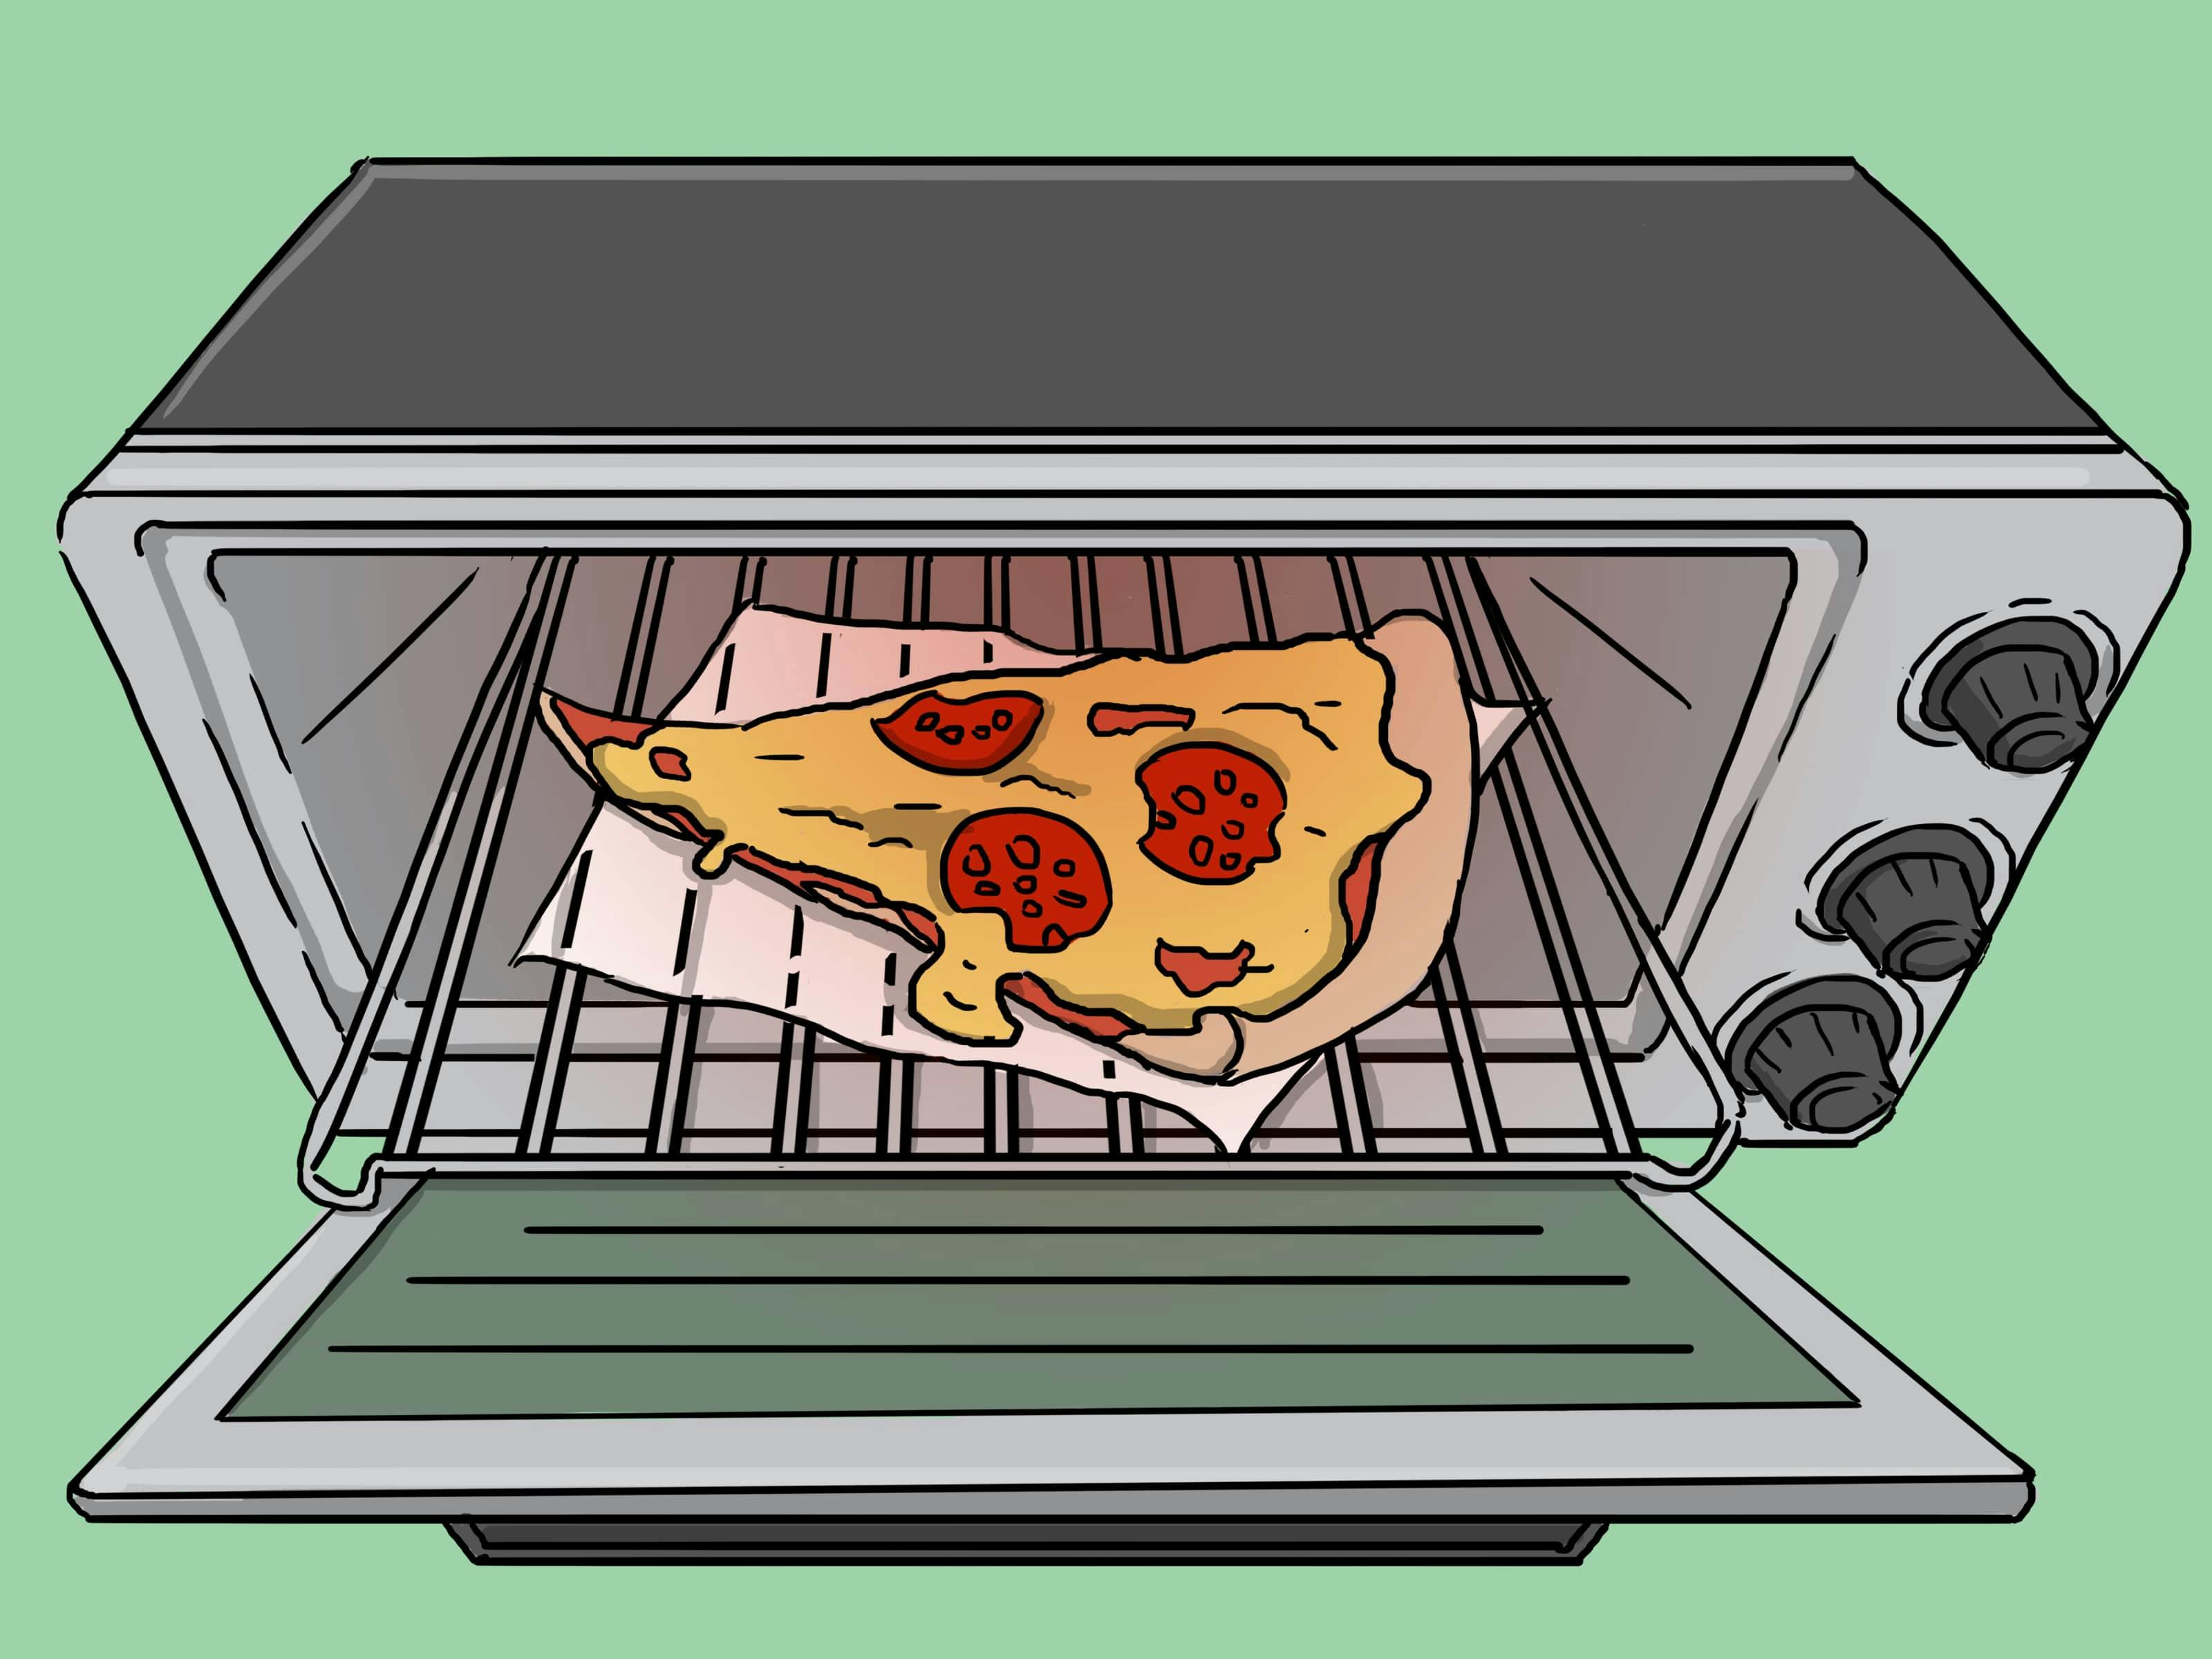 Crispy crust, melty cheese: Reheat pizza in a toaster oven with parchment paper.